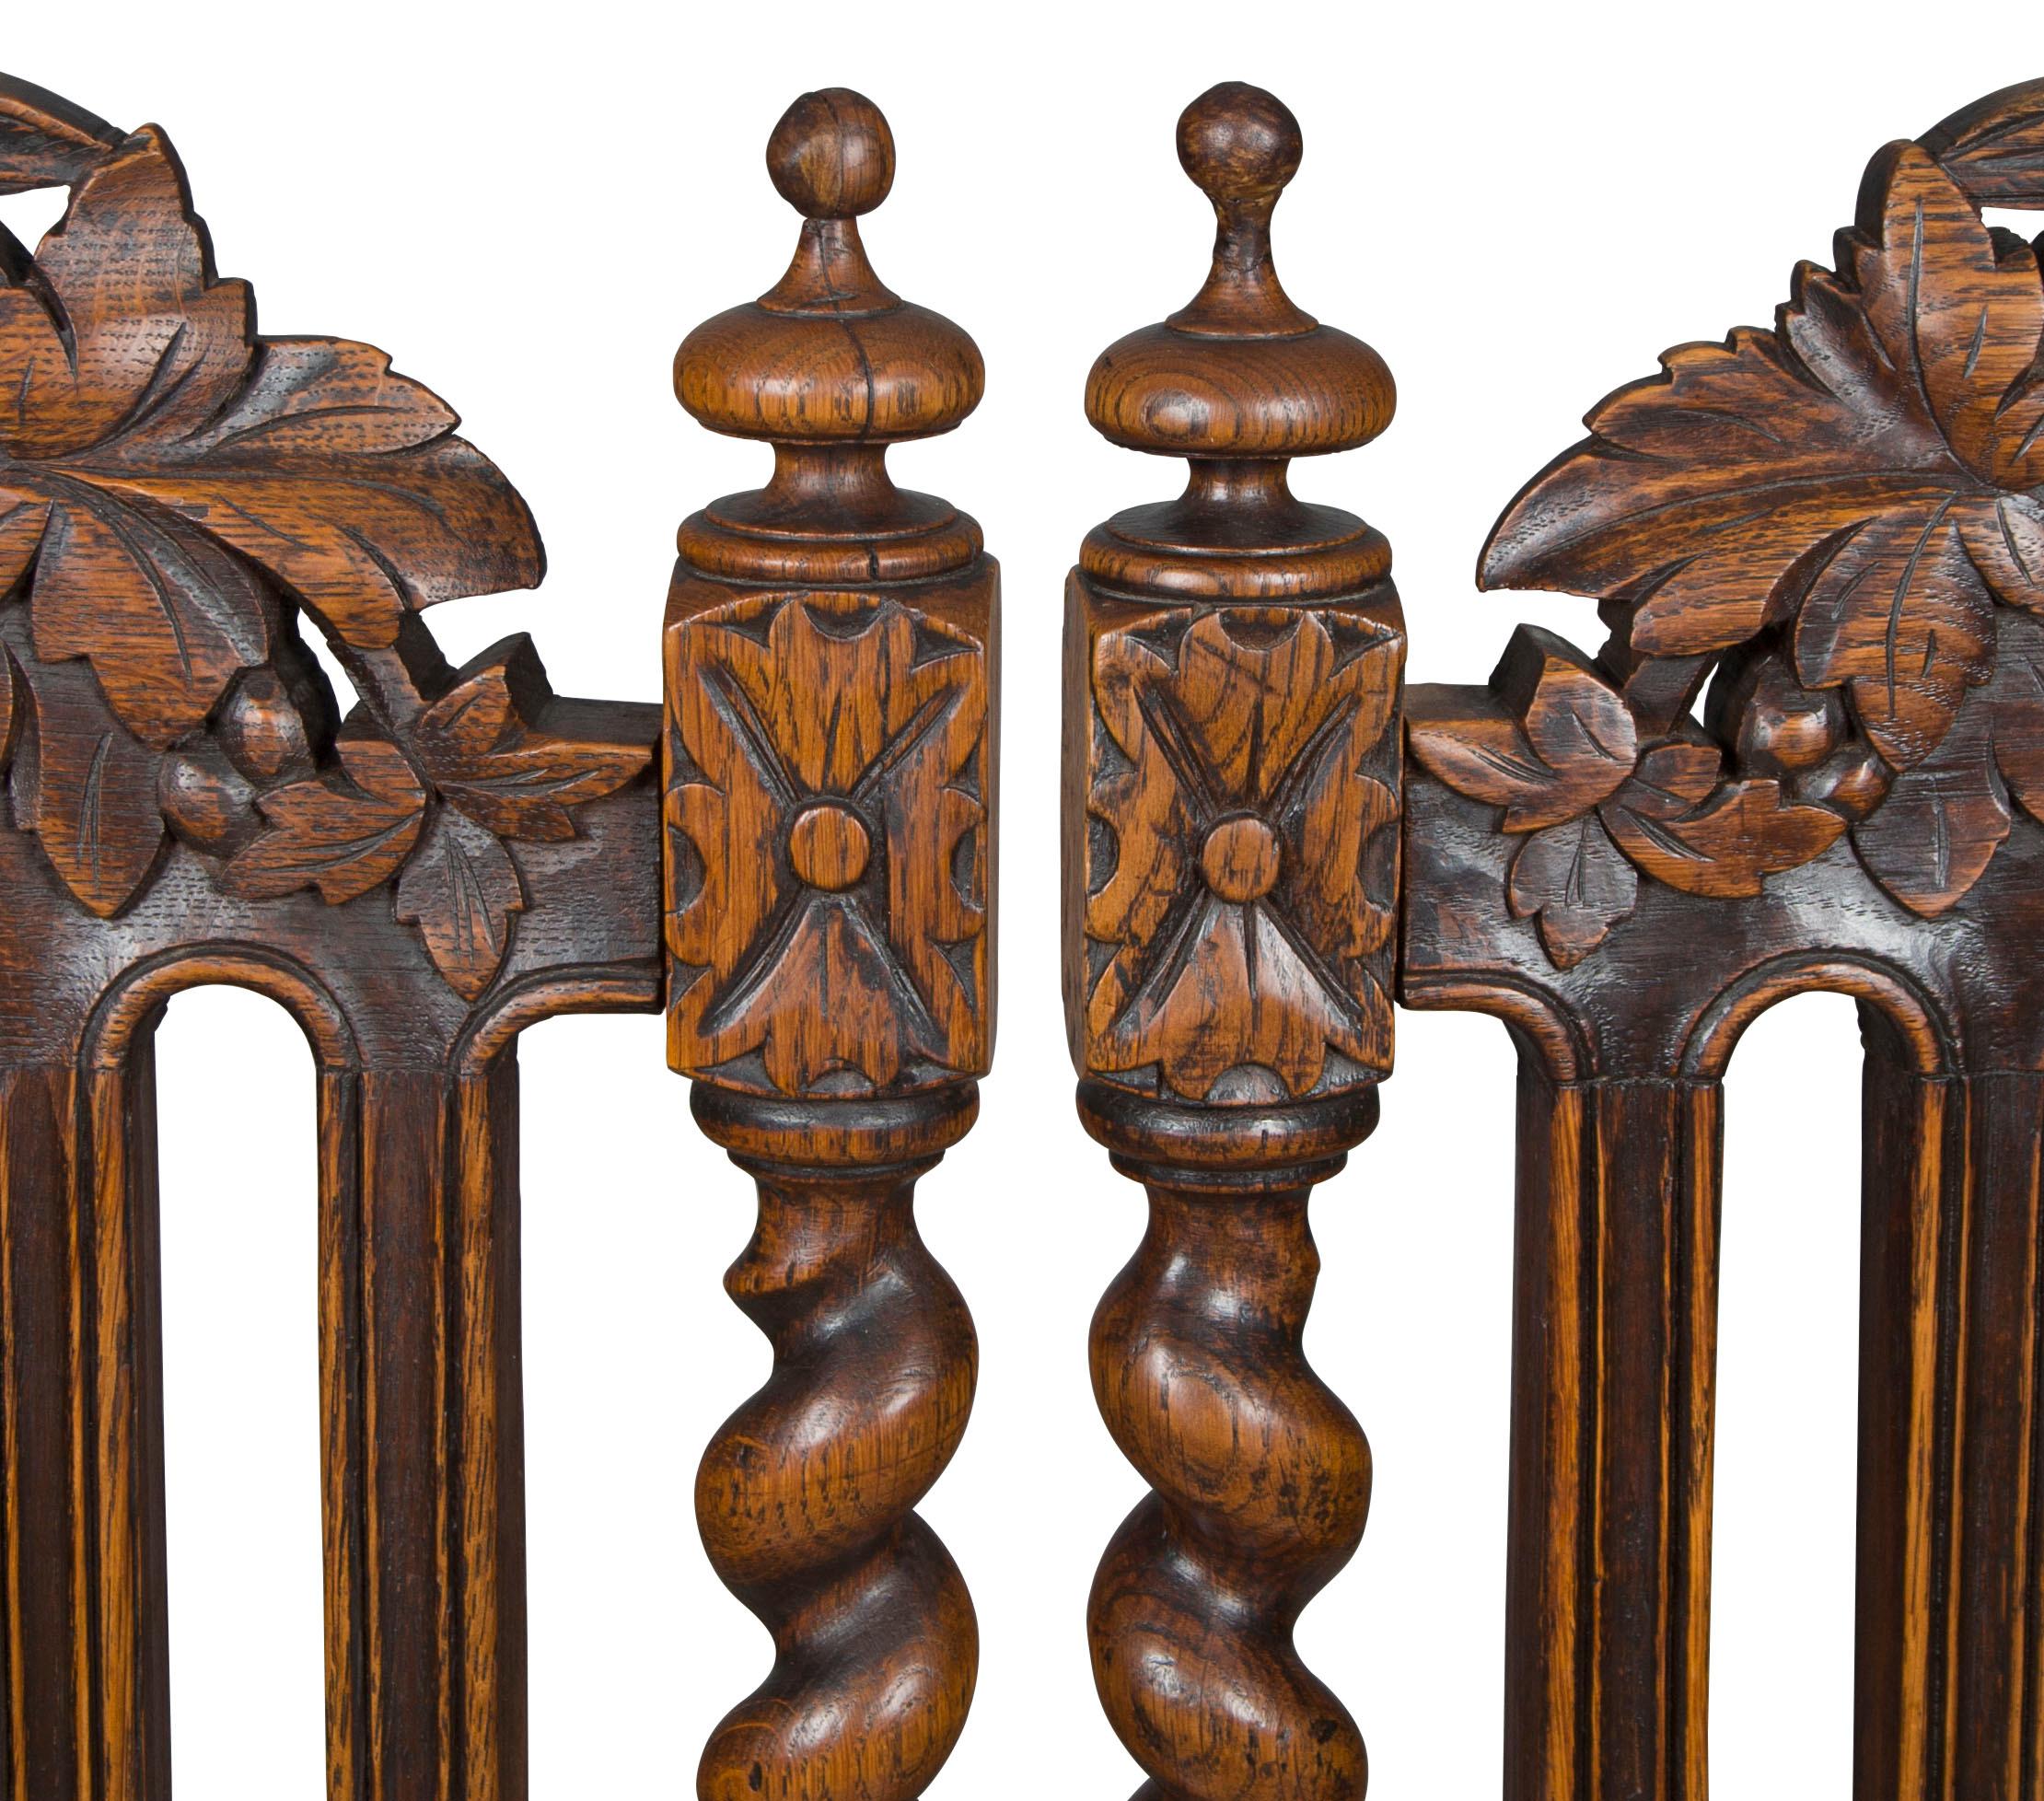 This set of six French Provincial dining room chairs are done in a stunning, hand carved oak. Barley twist columns on the back rests, front, and stretchers provide an extremely elegant look. Almost every part of the oak frames are covered in hand